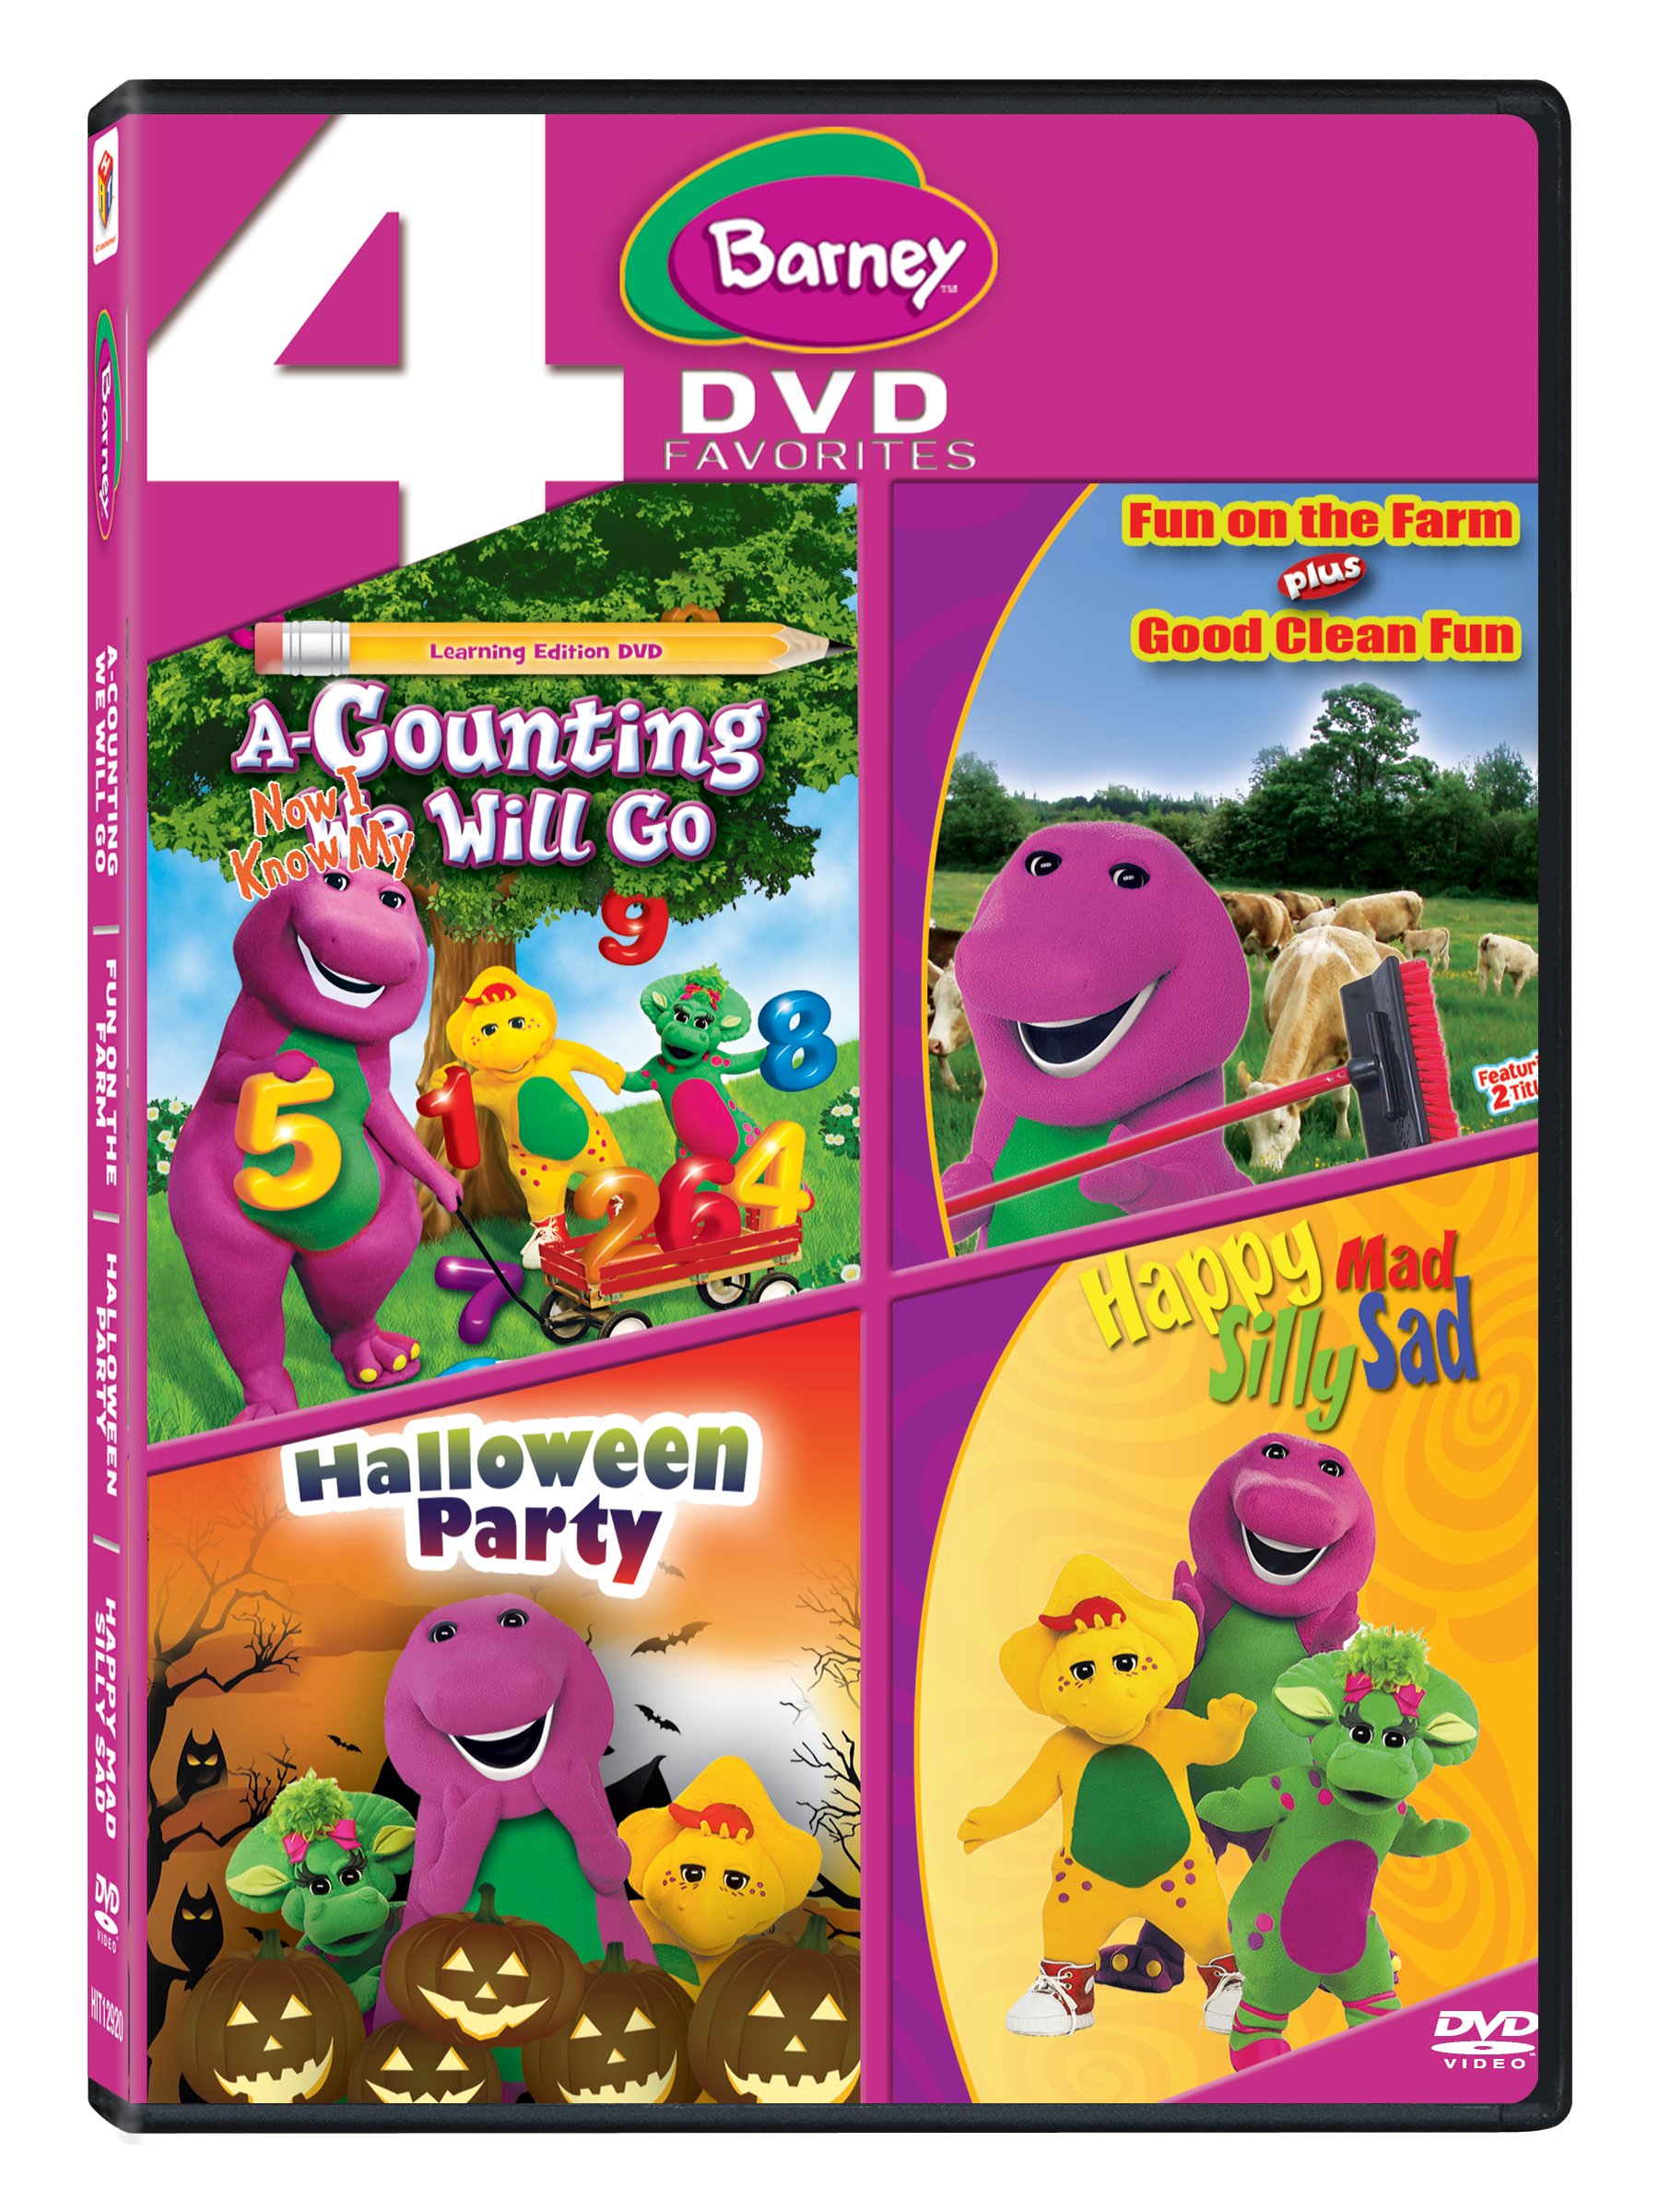 barney-a-counting-will-go-fun-on-the-farm-halloween-party-happy-mad-silly-sad-4-disc-box-set